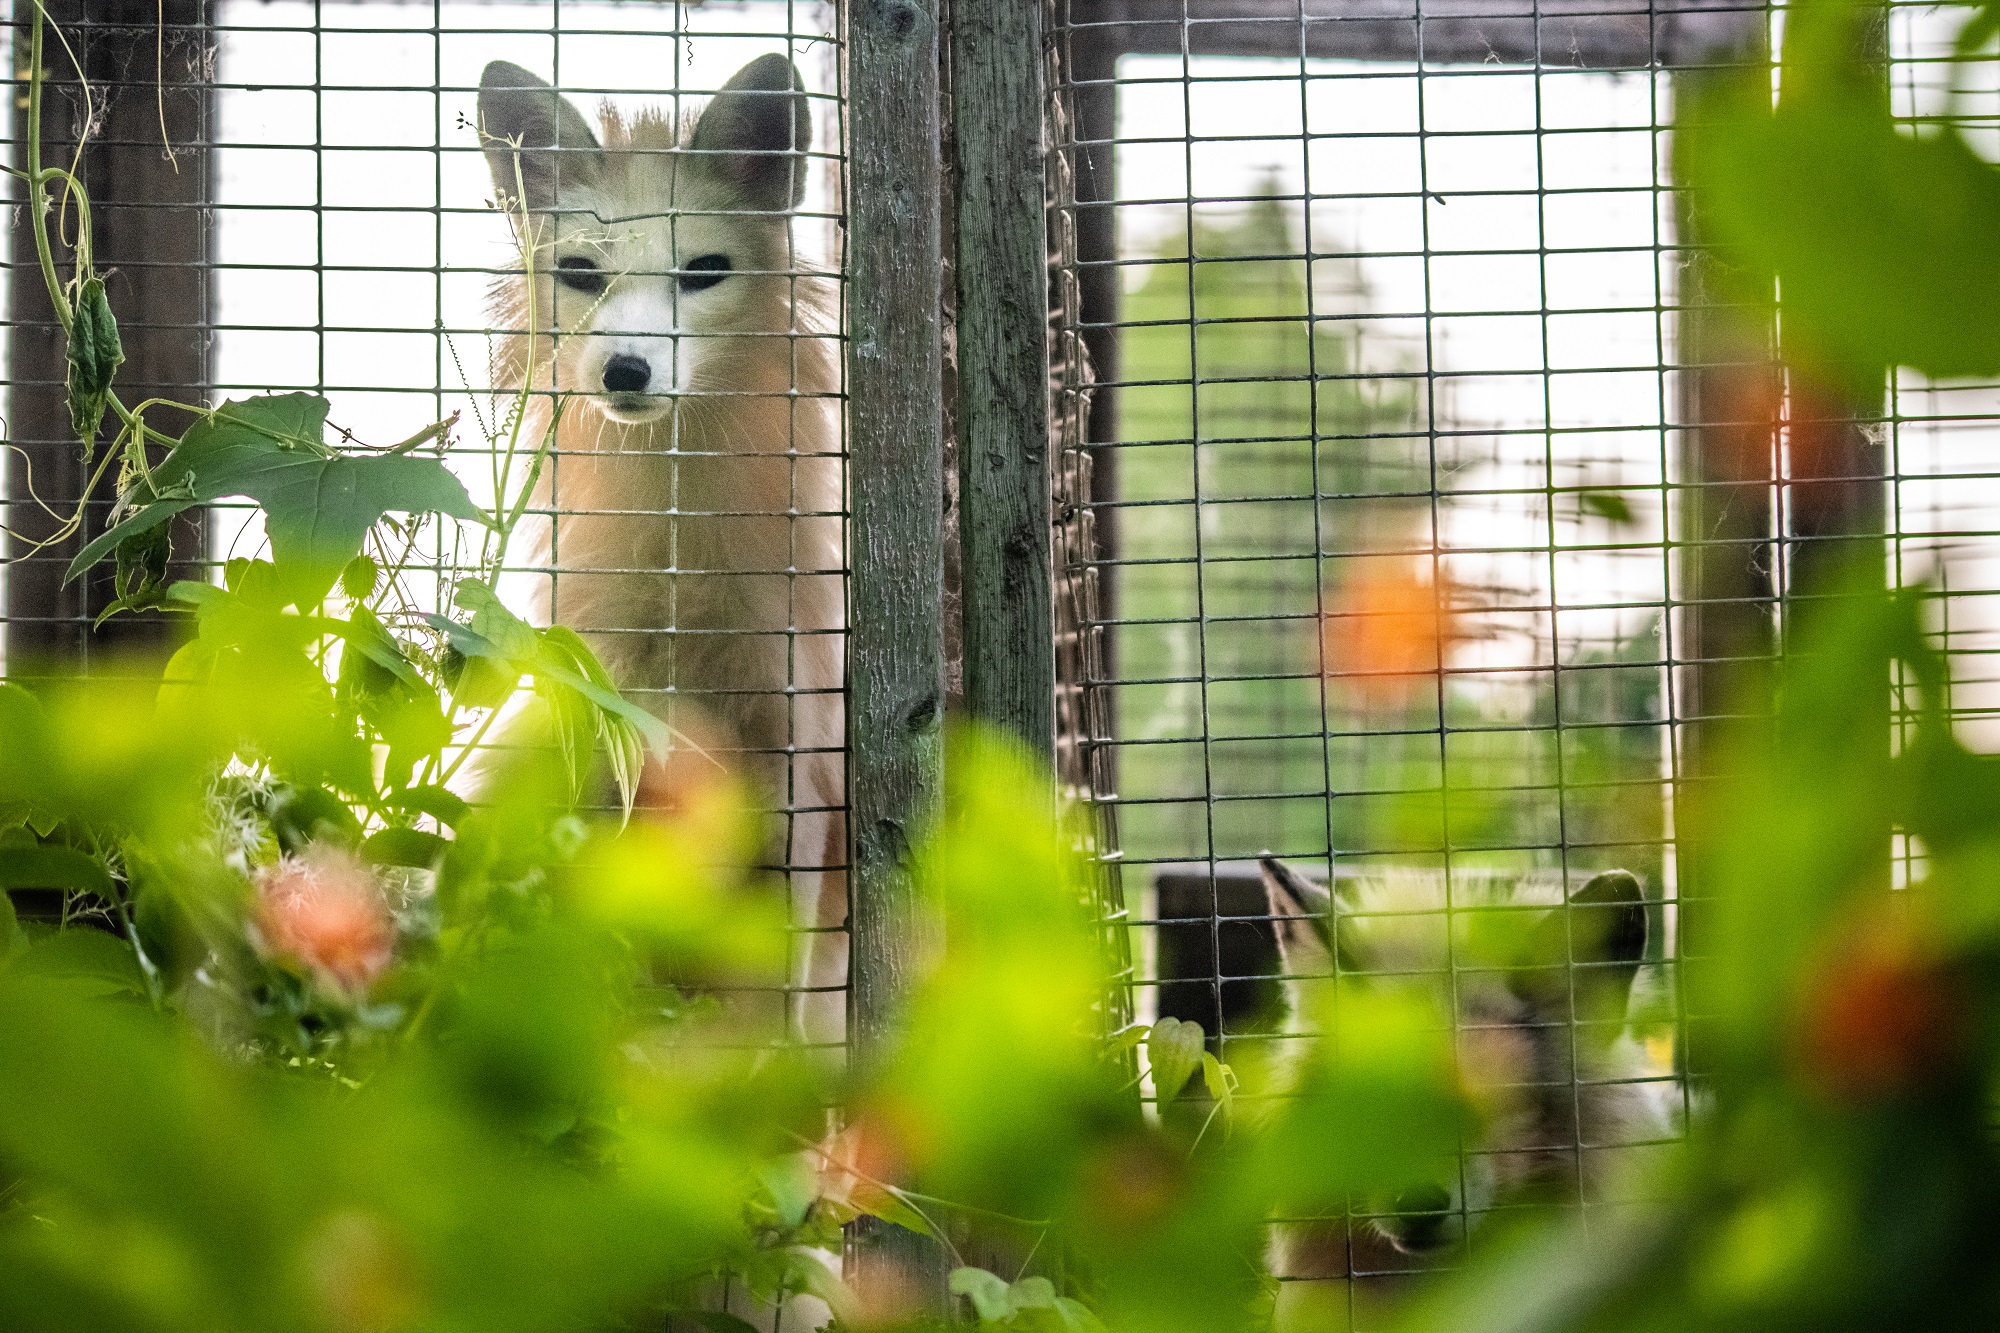 Two farmed foxes dwell side by side, alone in barren cages at a fur farm in Quebec, Canada. These calico or marble-coated foxes spend their entire lives separated from each other inside these types of cages. They are used for breeding or will themselves eventually be killed for their fur.